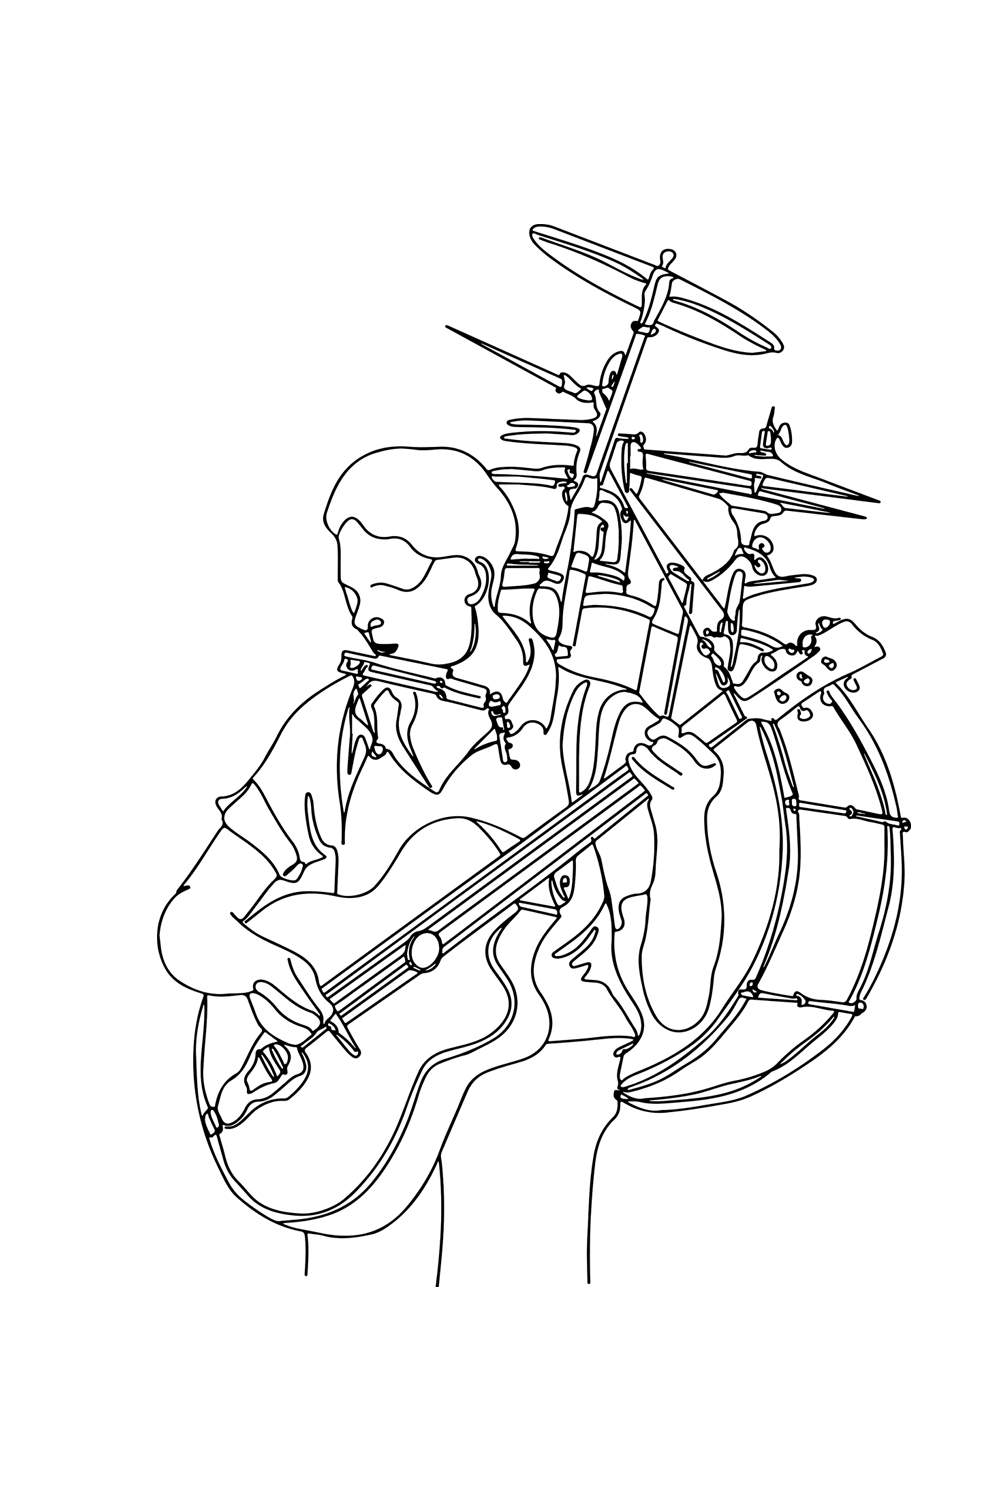 Hand-Drawn Cartoon: Musical One-Man Band Street Performance, Street Musician's Melody: Cartoon Sketch of Multi-Instrument Talent, One-Man Band in Action pinterest preview image.